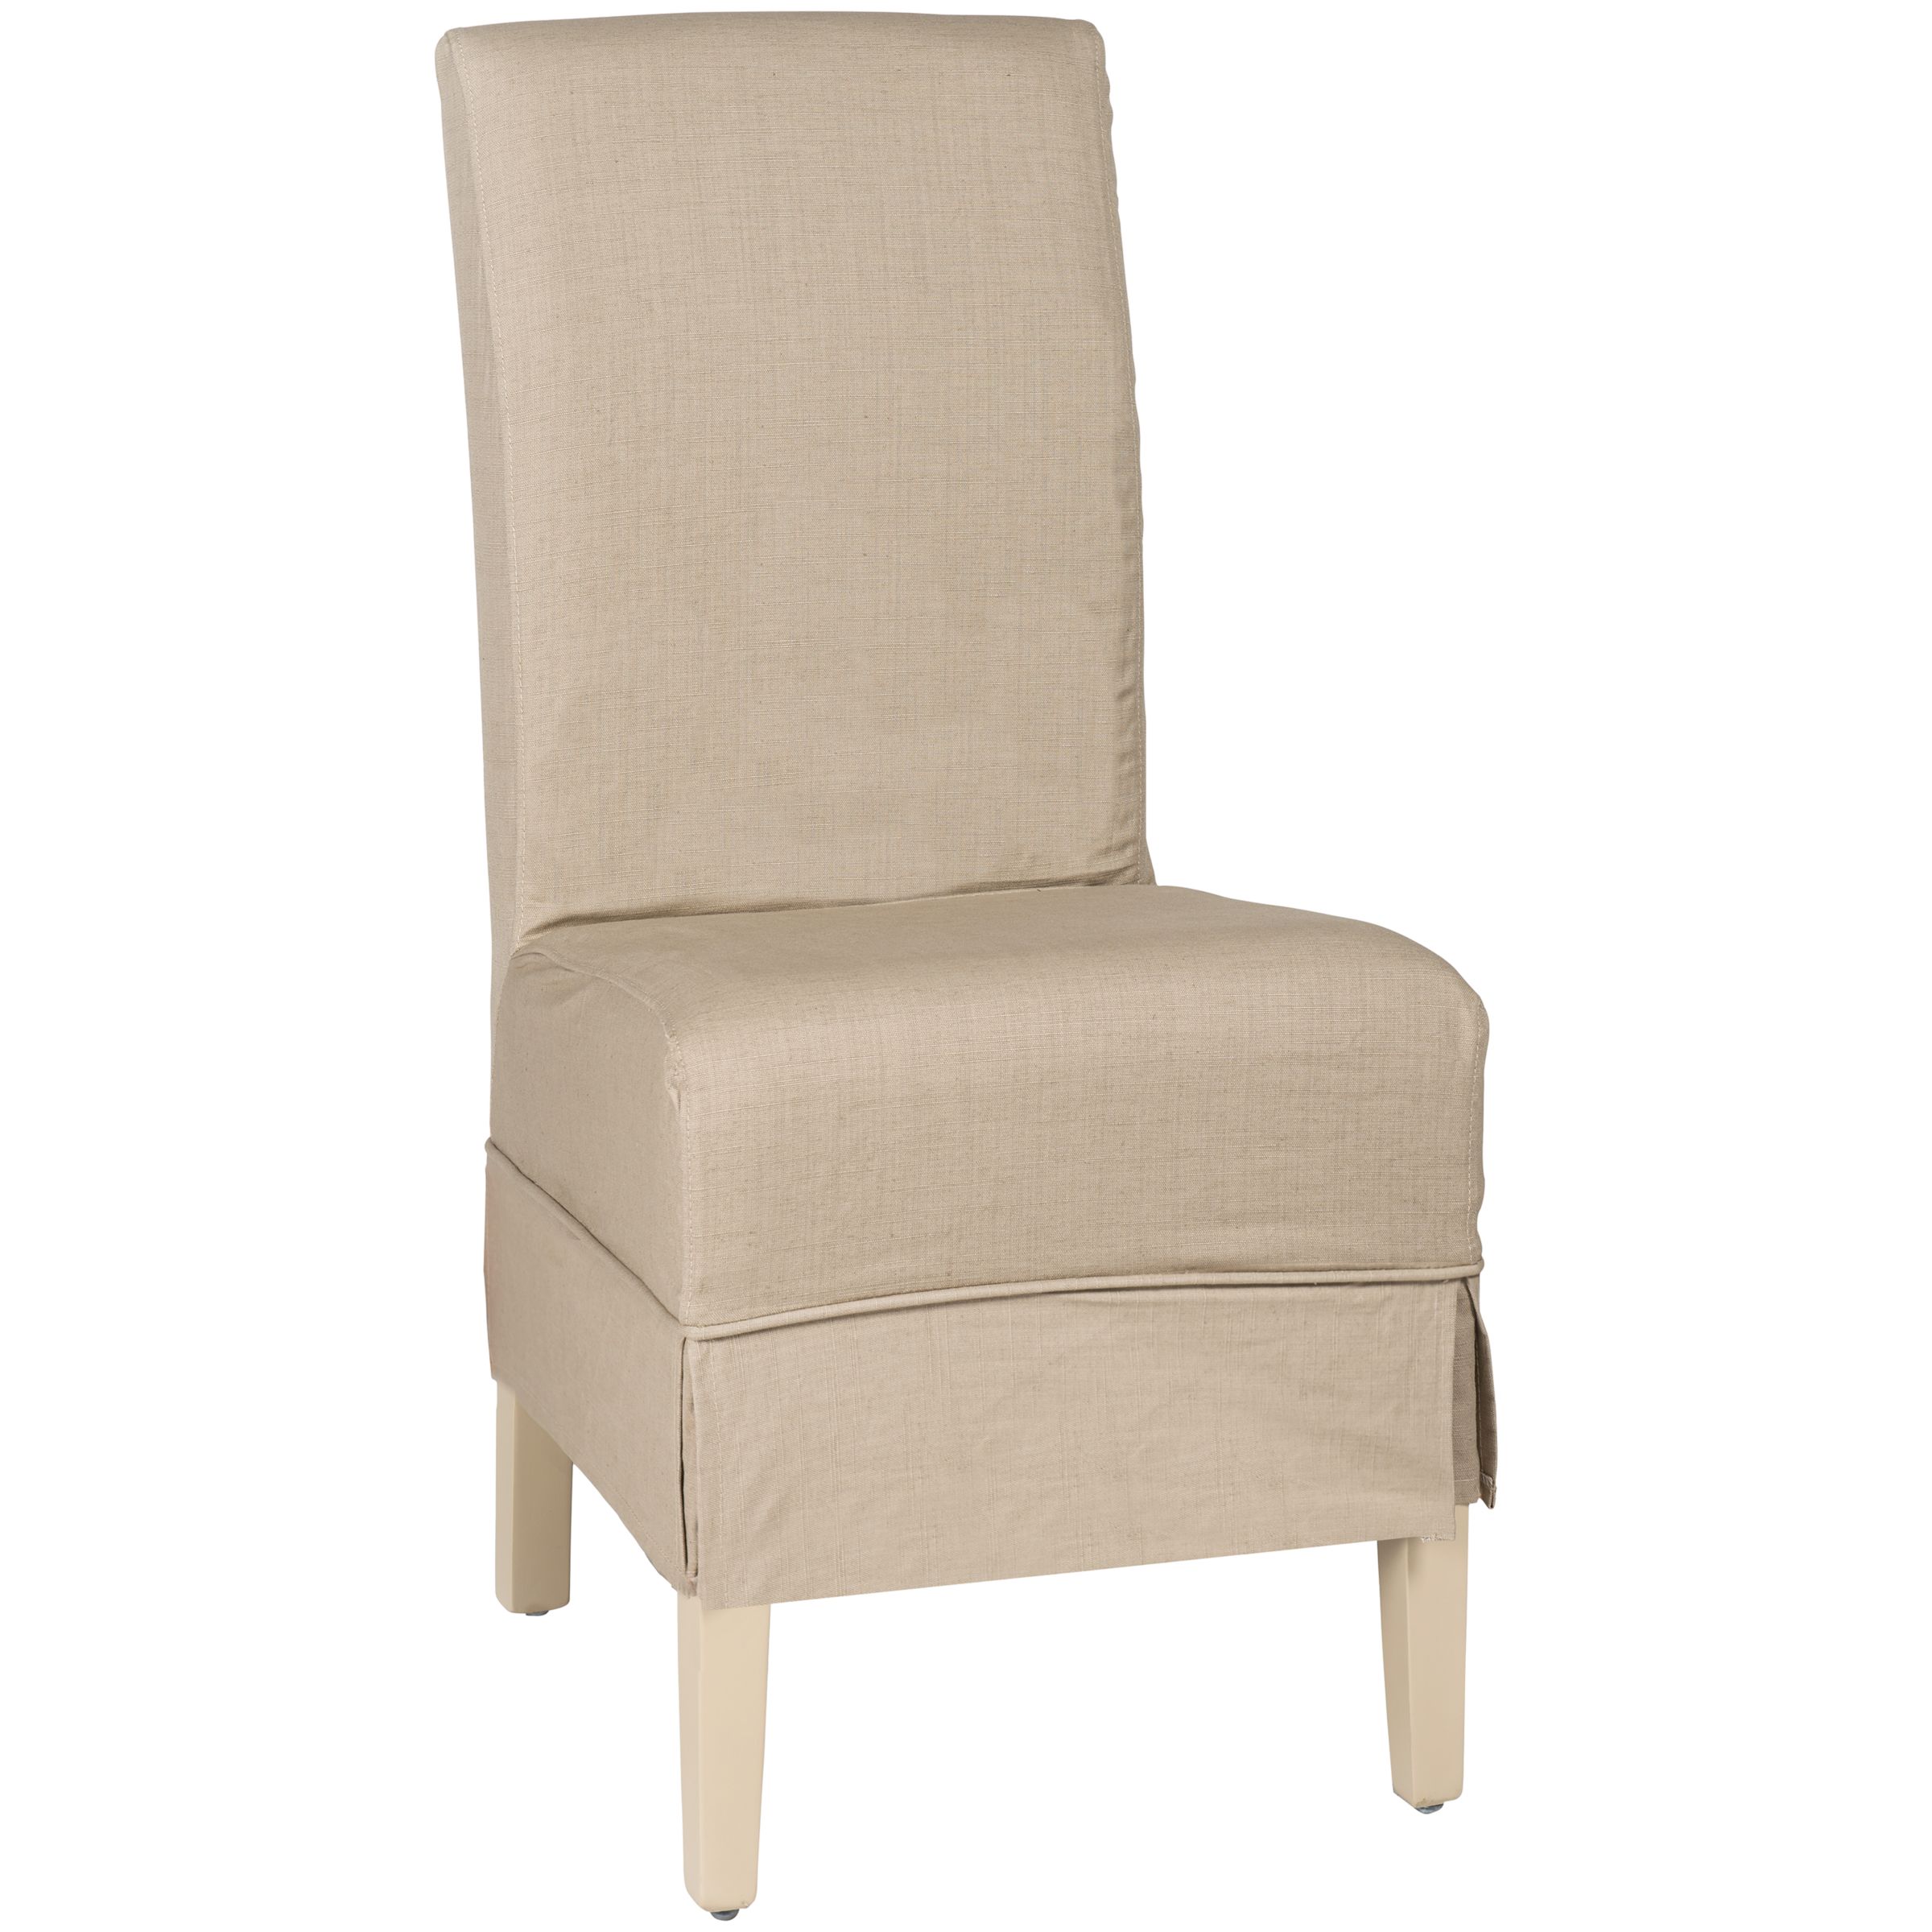 Neptune Long Island Dining Chair At John Lewis Partners